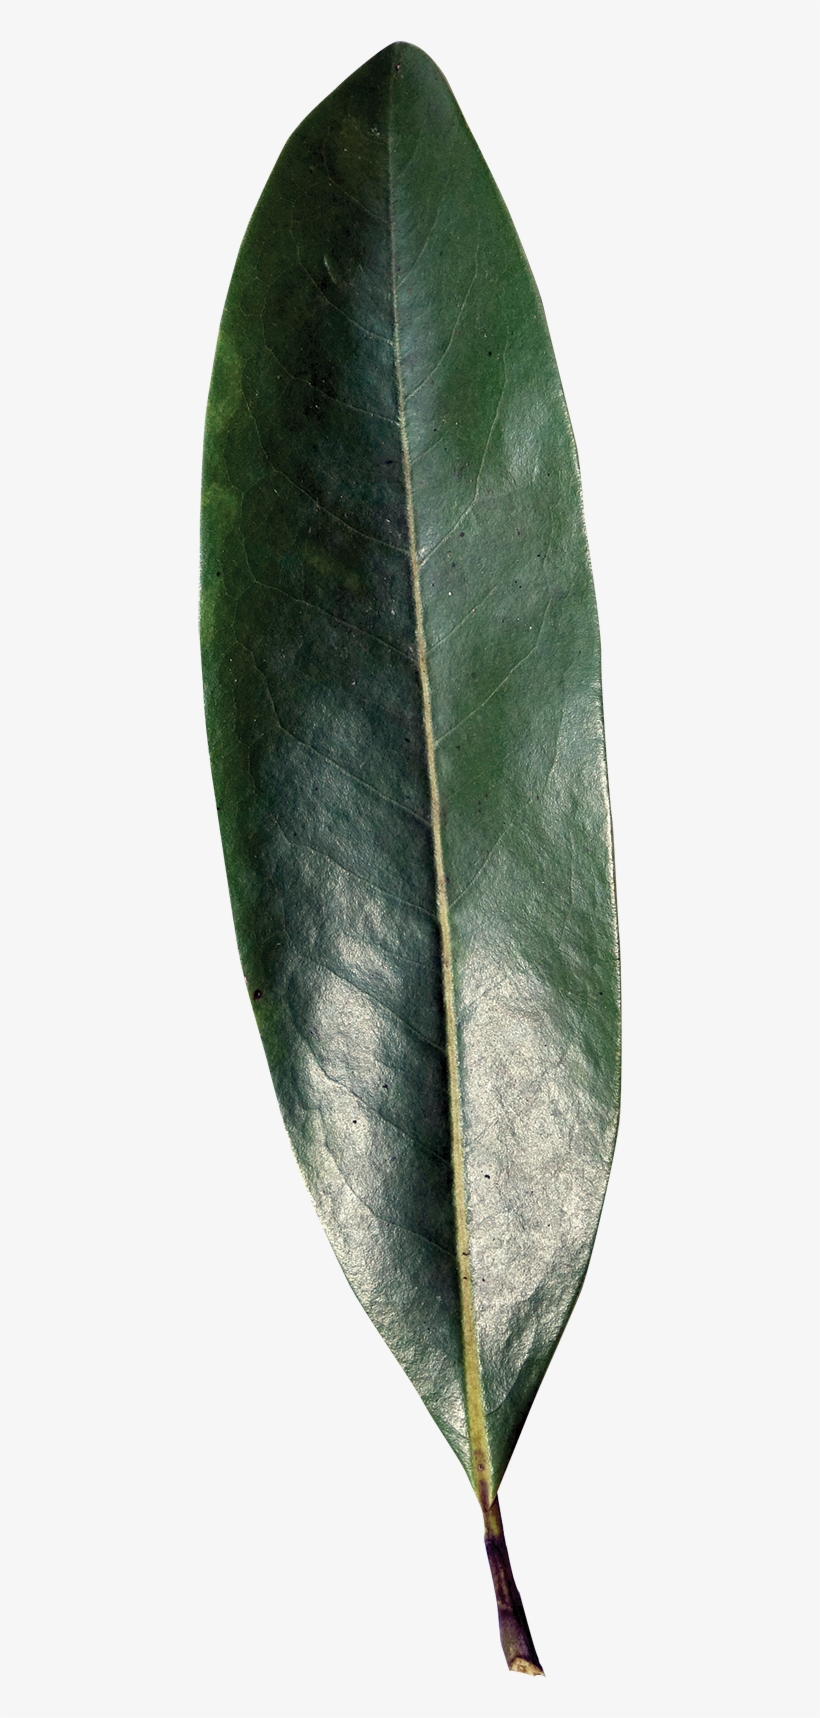 Simple - Sweetbay Magnolia Leaf, transparent png #5531811